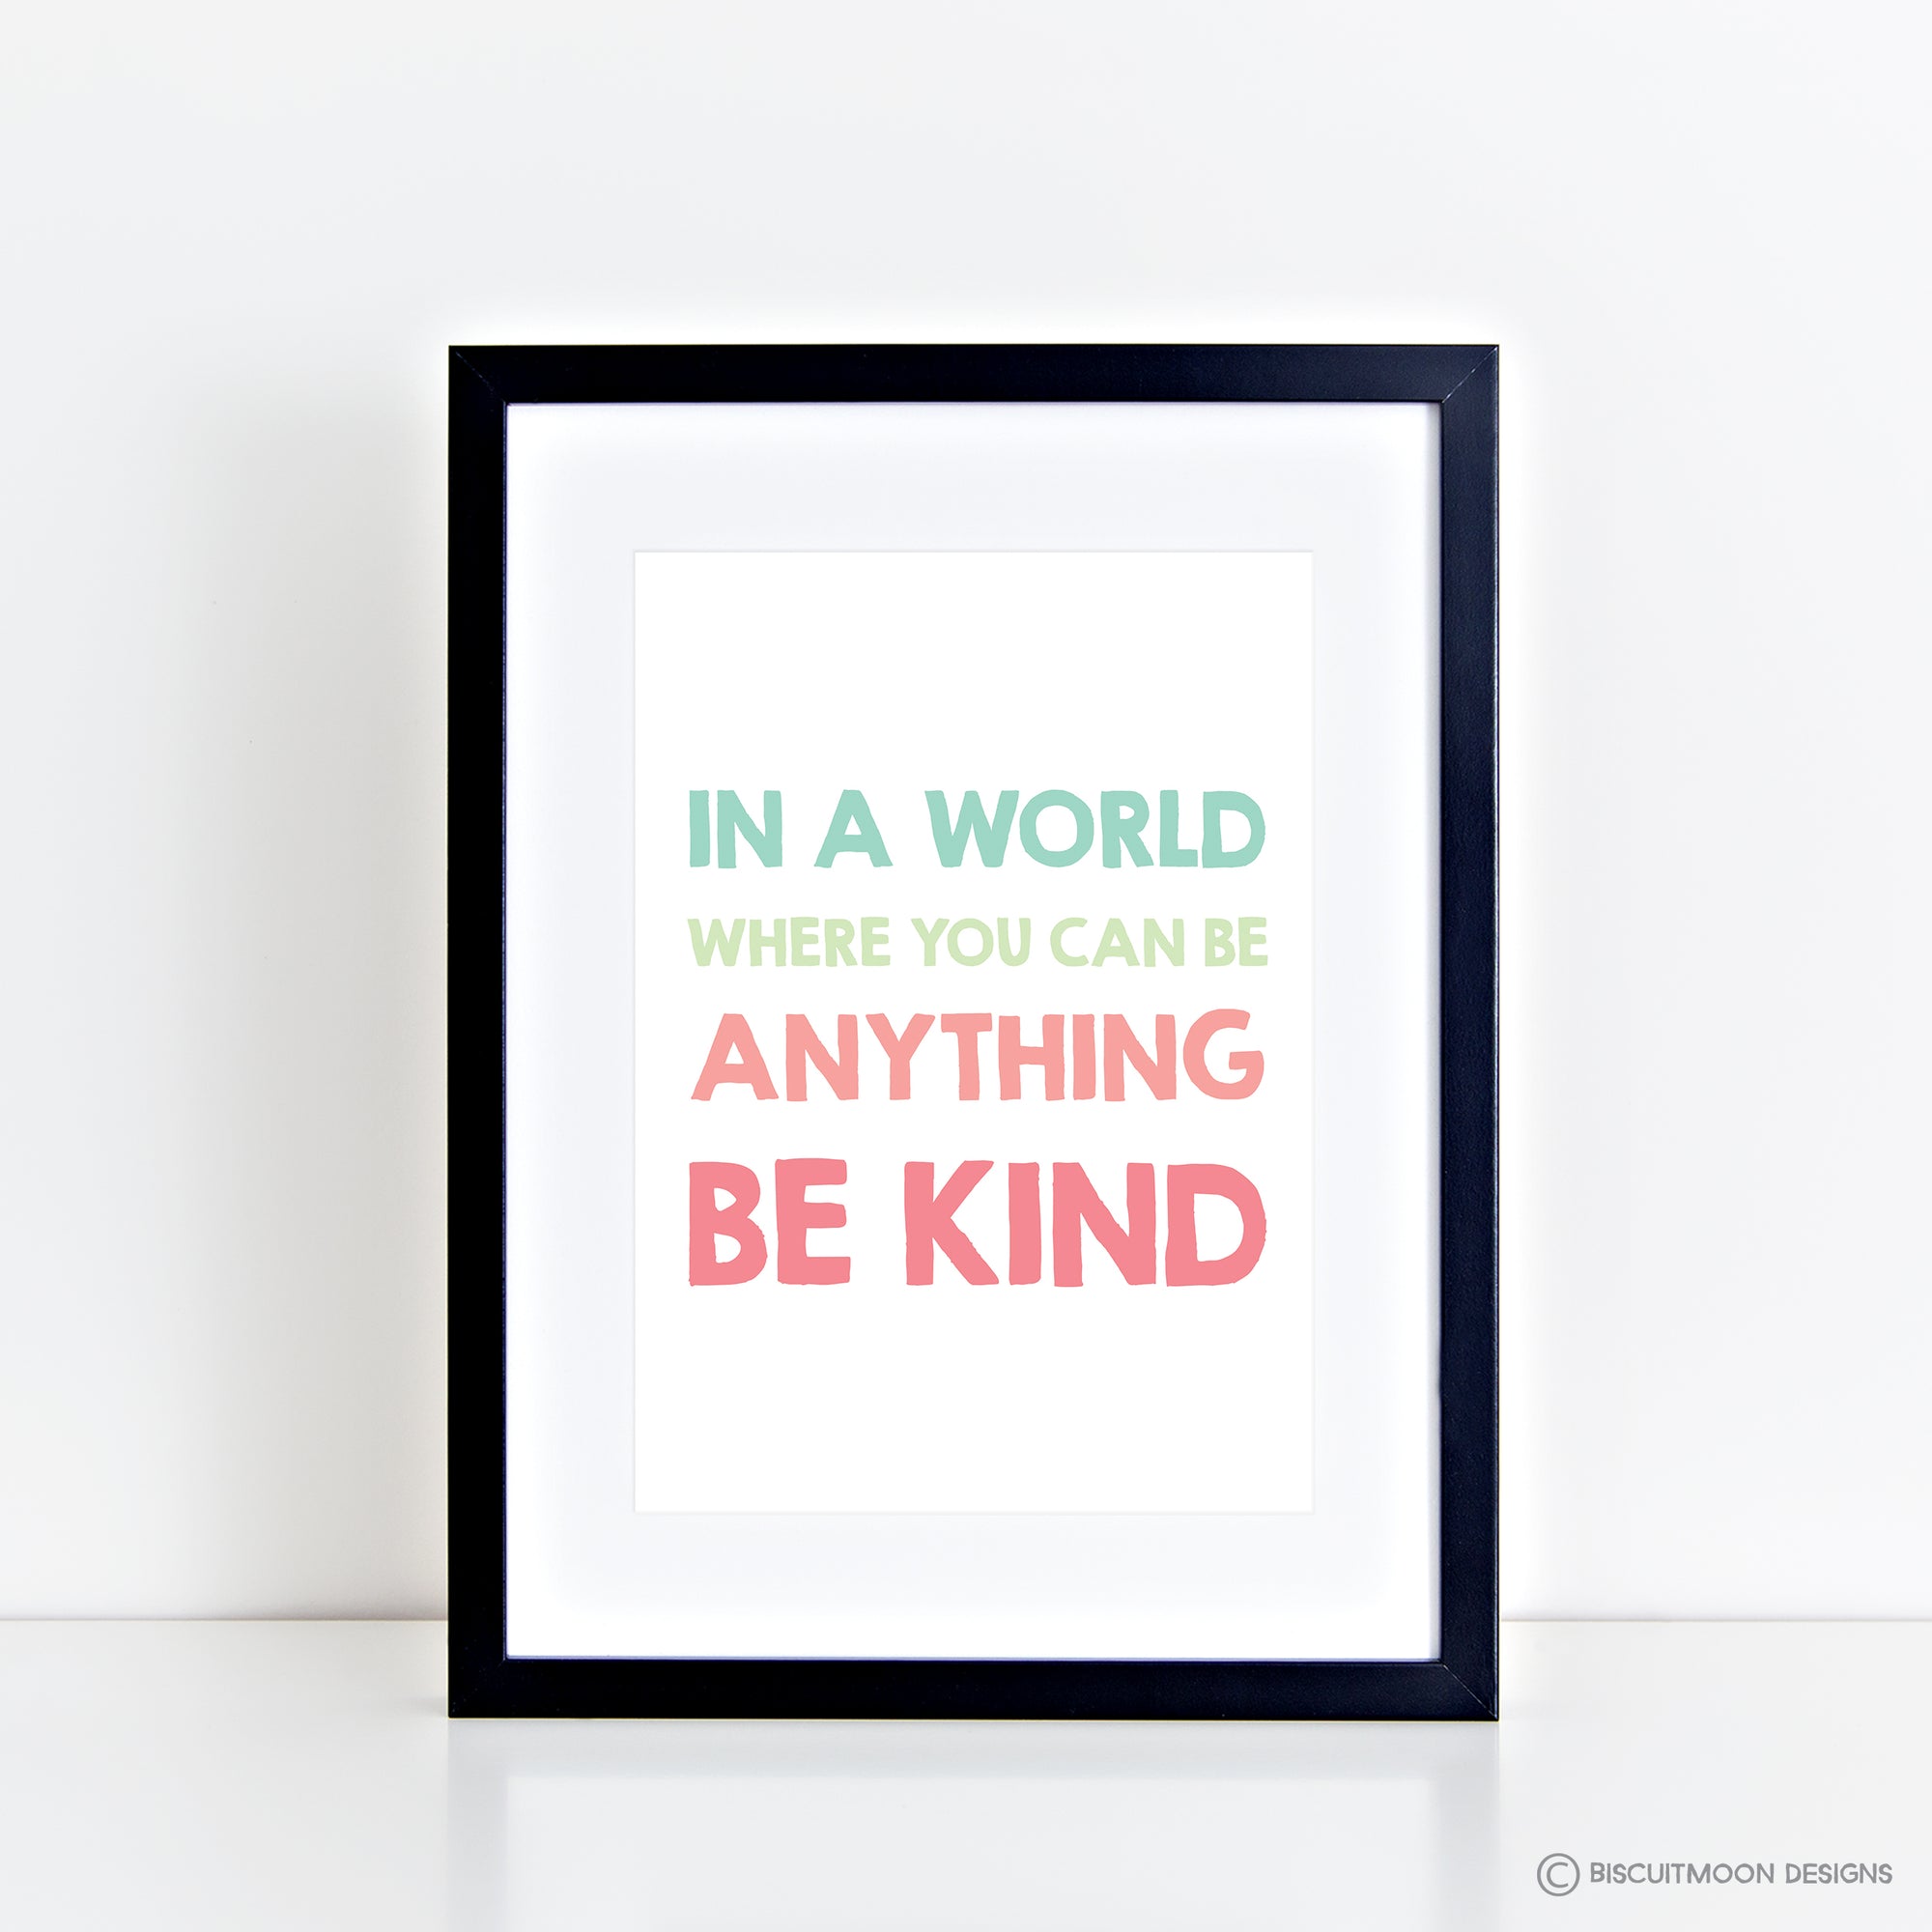 In a world where you can be anything be kind print